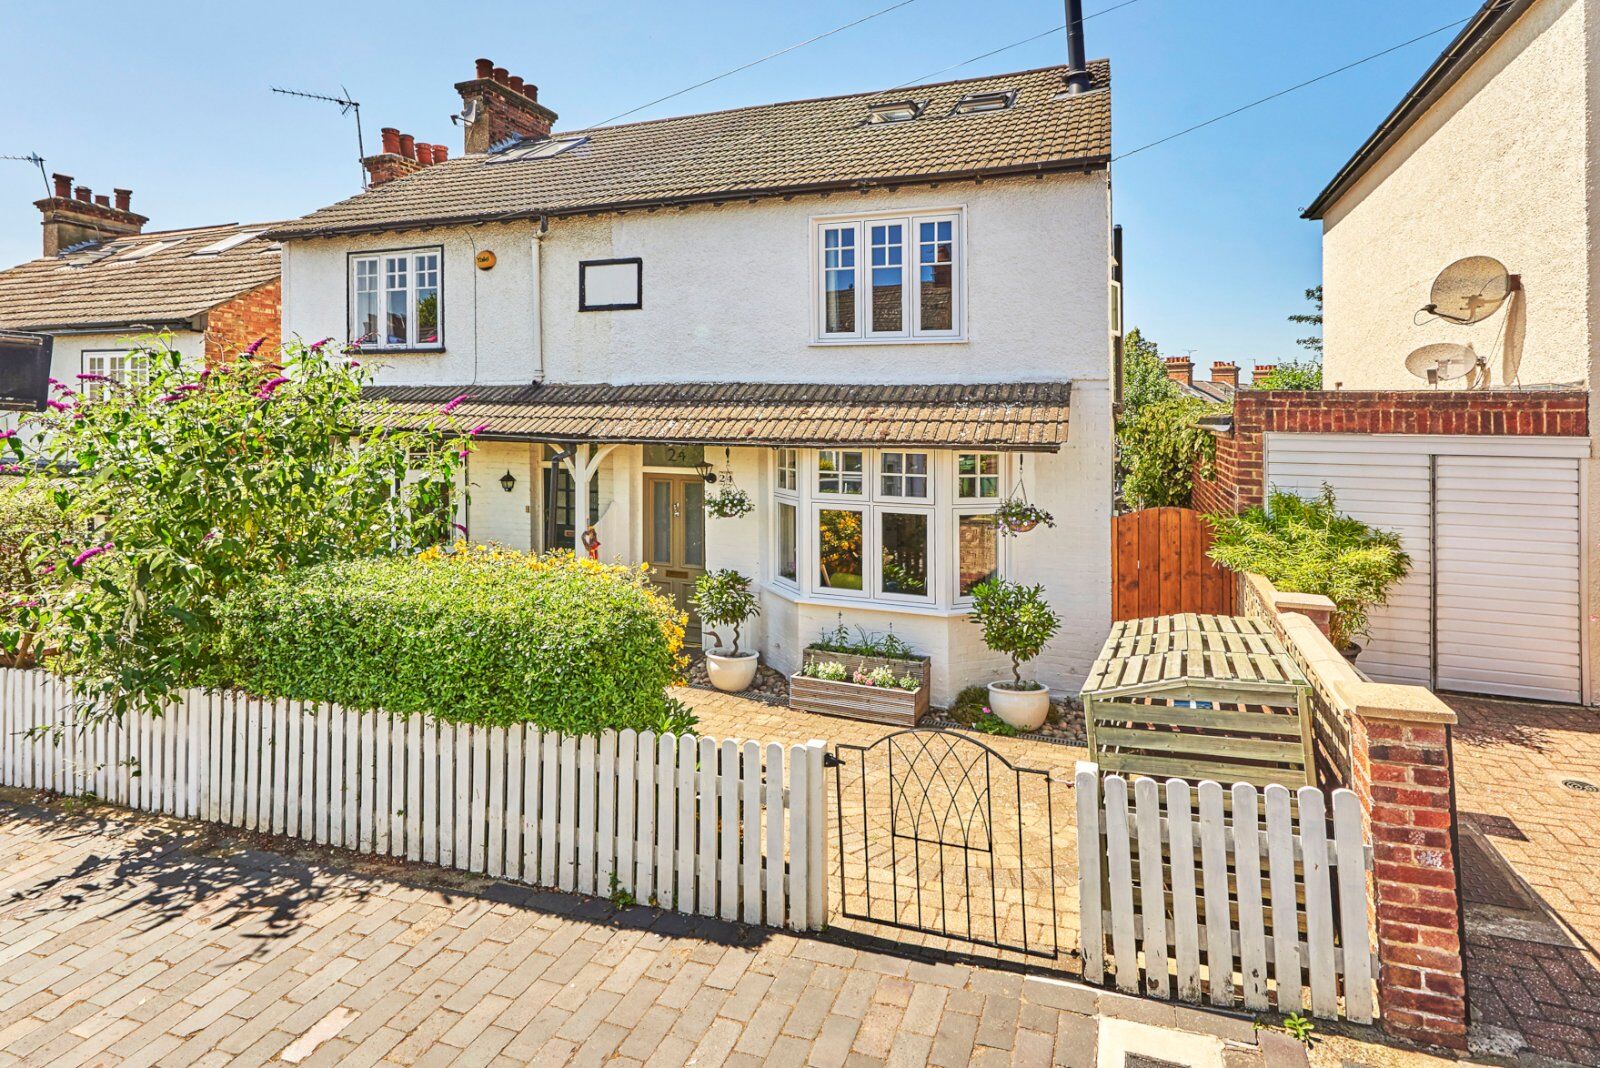 4 bedroom semi detached house for sale Cornwall Road, St. Albans, AL1, main image